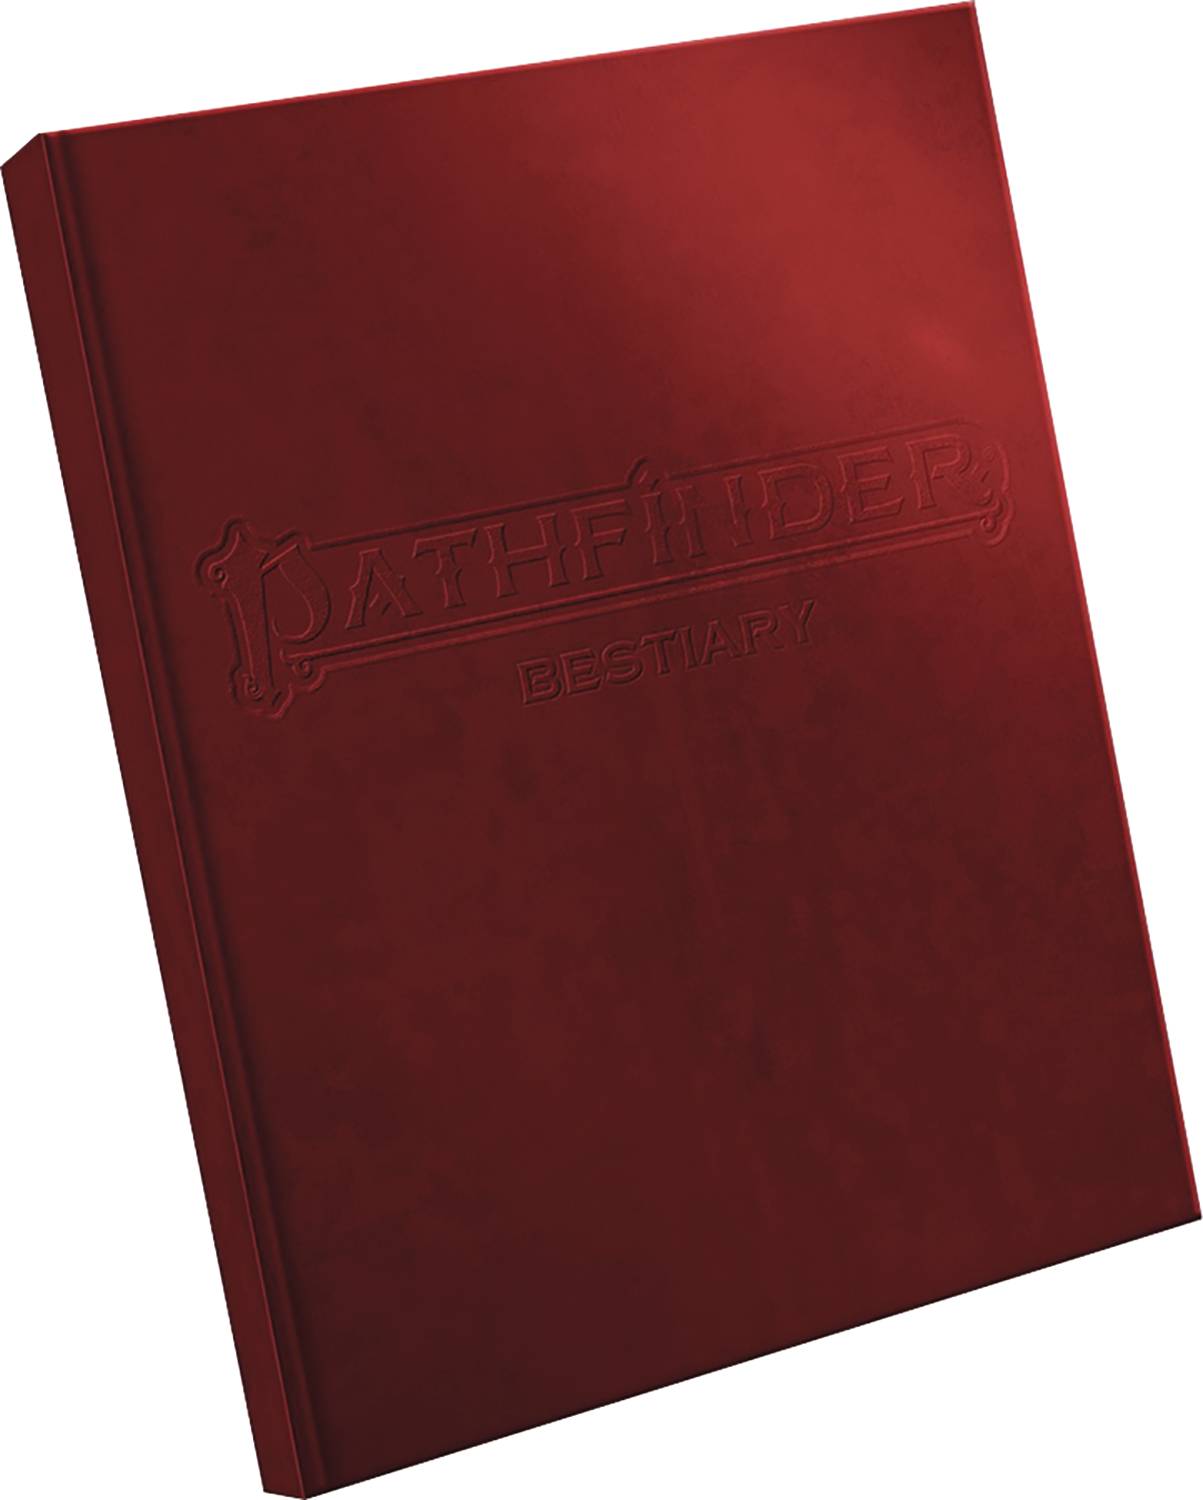 Pathfinder Bestiary Hardcover Special Edition (P2)